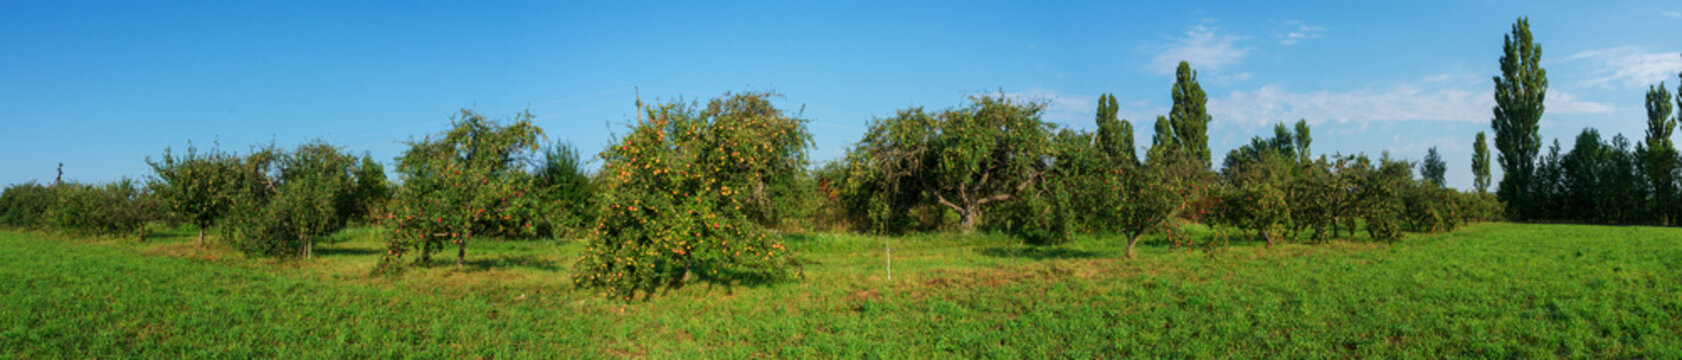 apples ripe on a tree. A panorama of fruit trees.